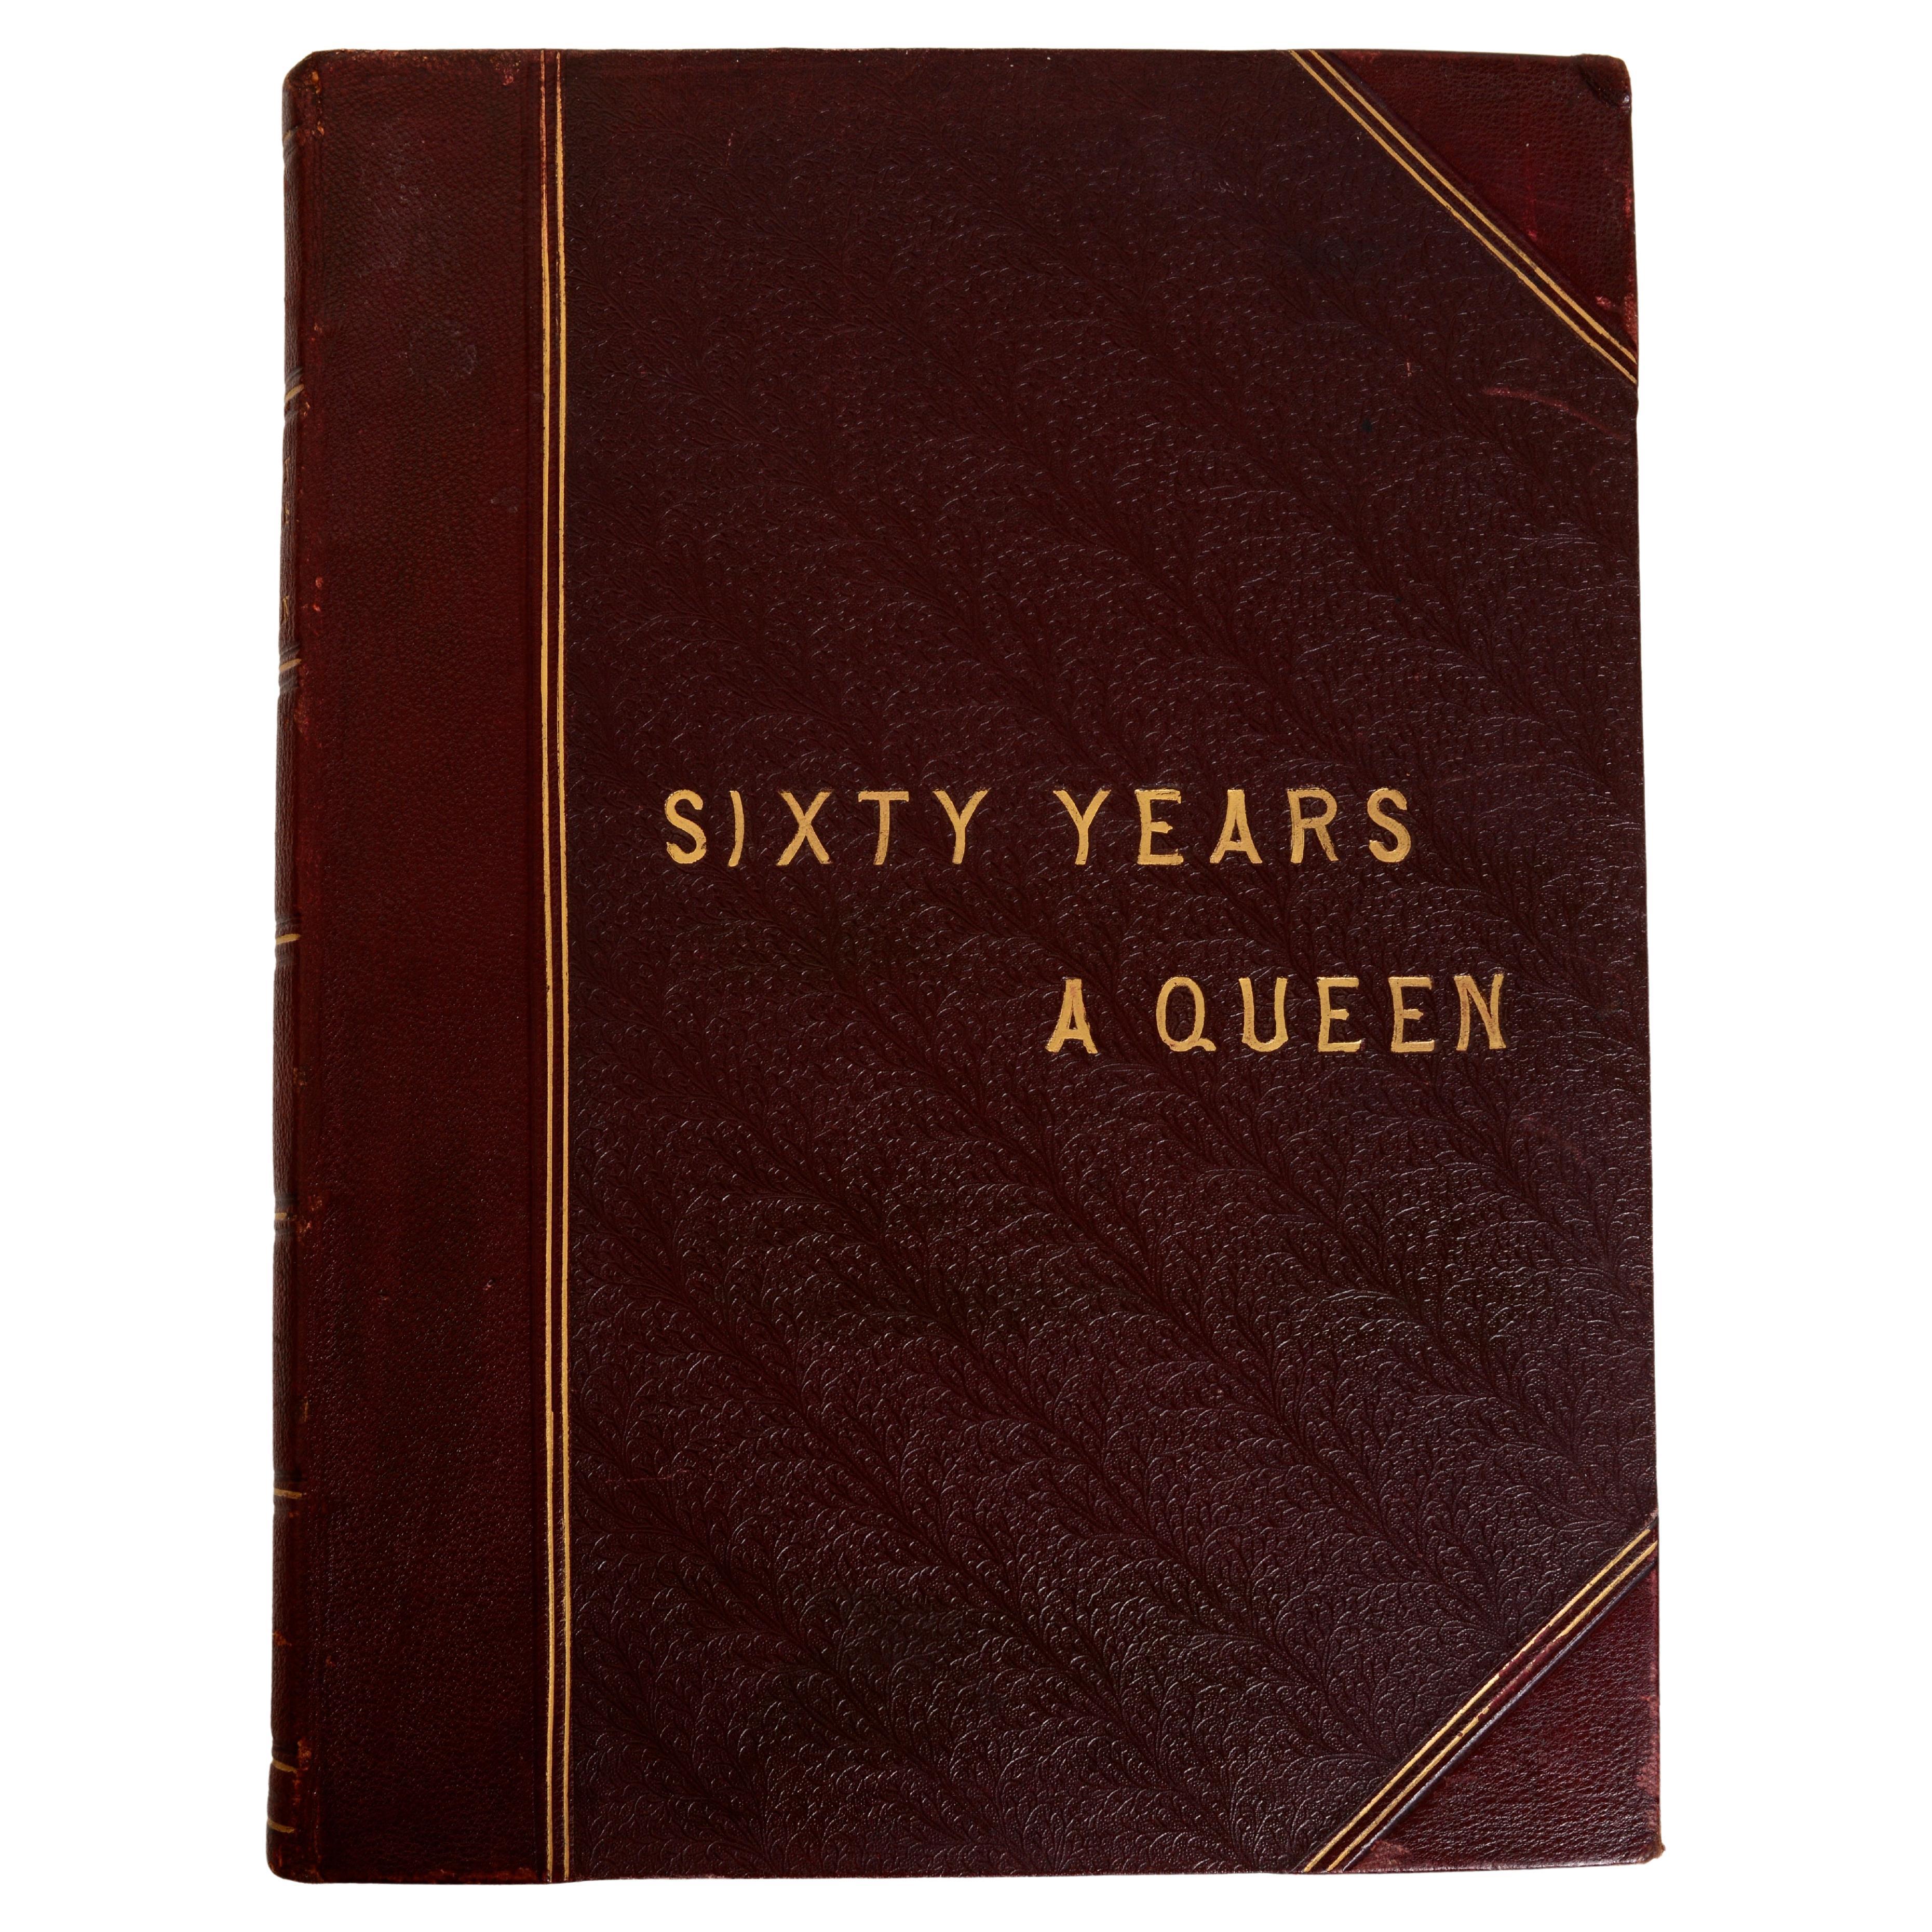 Sixty Years A Queen The Story Of Her Majesty's Reign (L'histoire de son règne), 1st Ed en vente